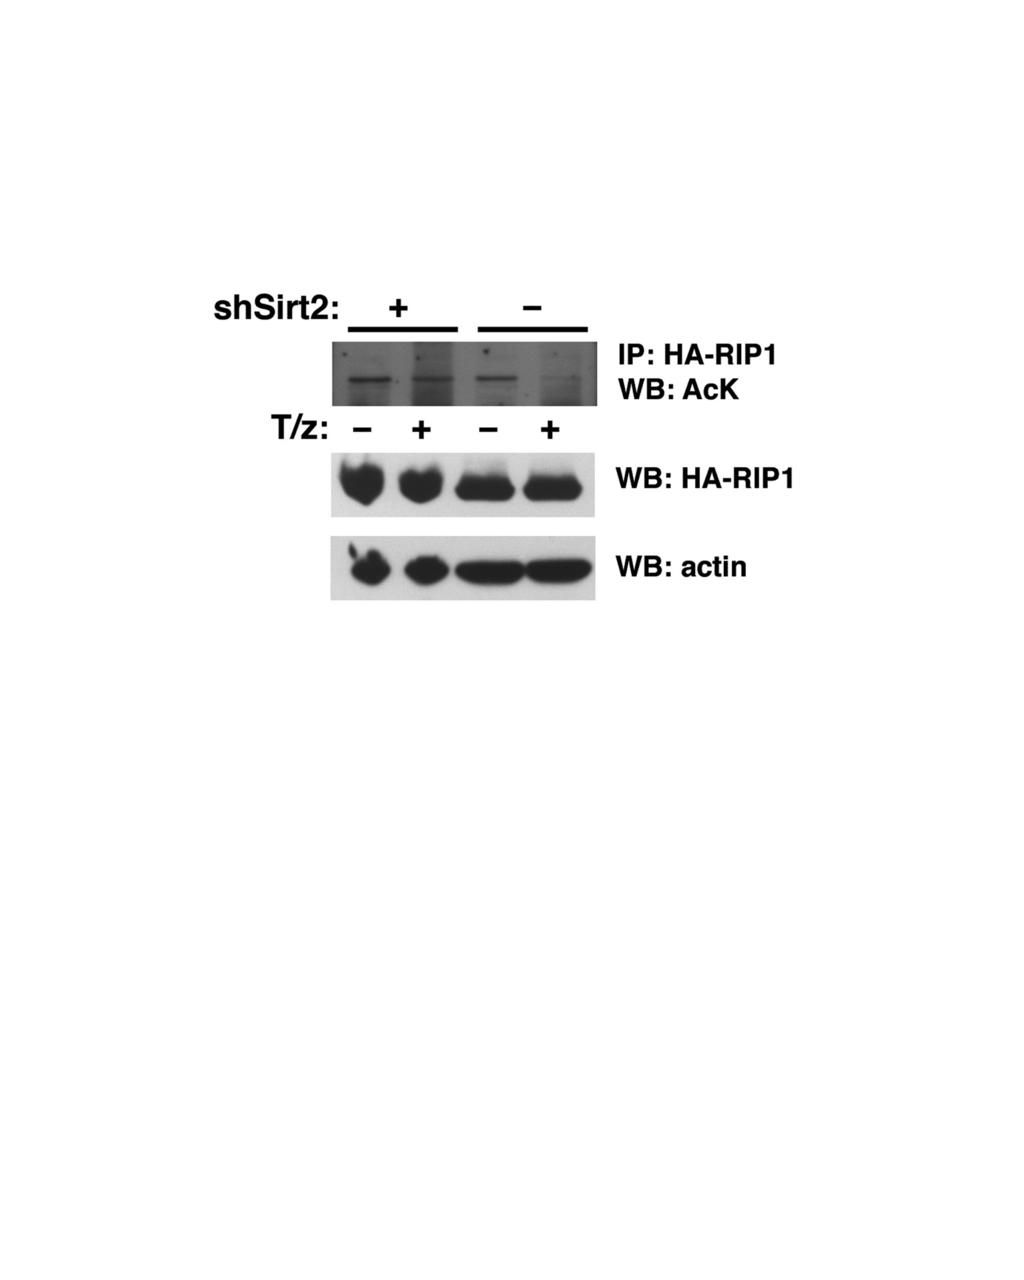 Figure 6: Assessment of RIP1 acetylation. Reverse procedure for detecting RIP1 acetylation using immunoprecipitation of RIP1 followed by Western blotting using an acetyl-lysine antibody (AcK).